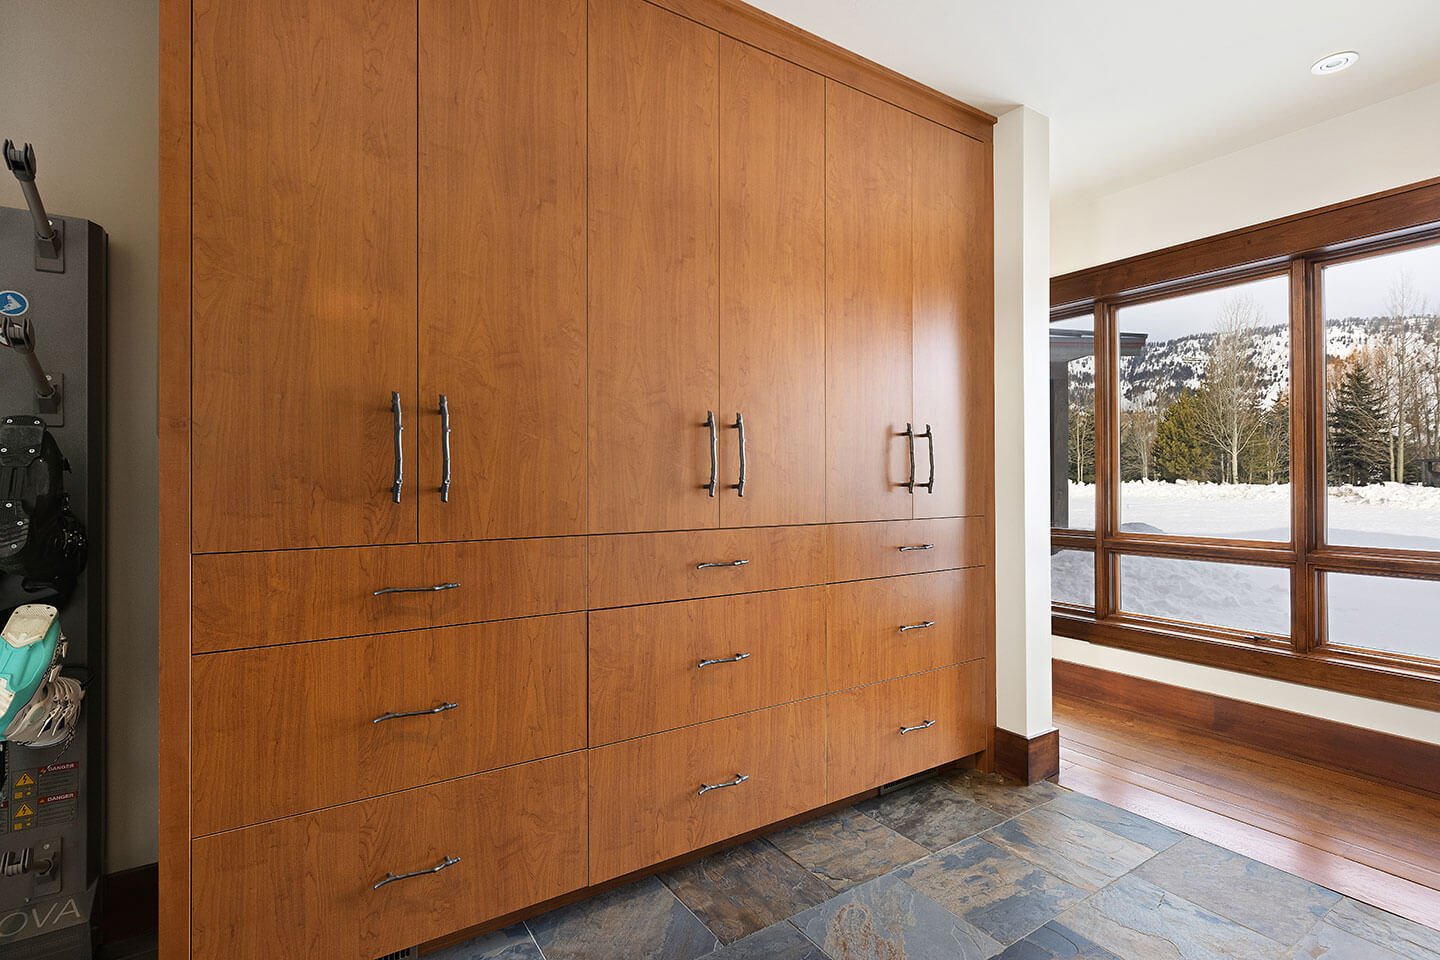 Mudroom with large-span windows